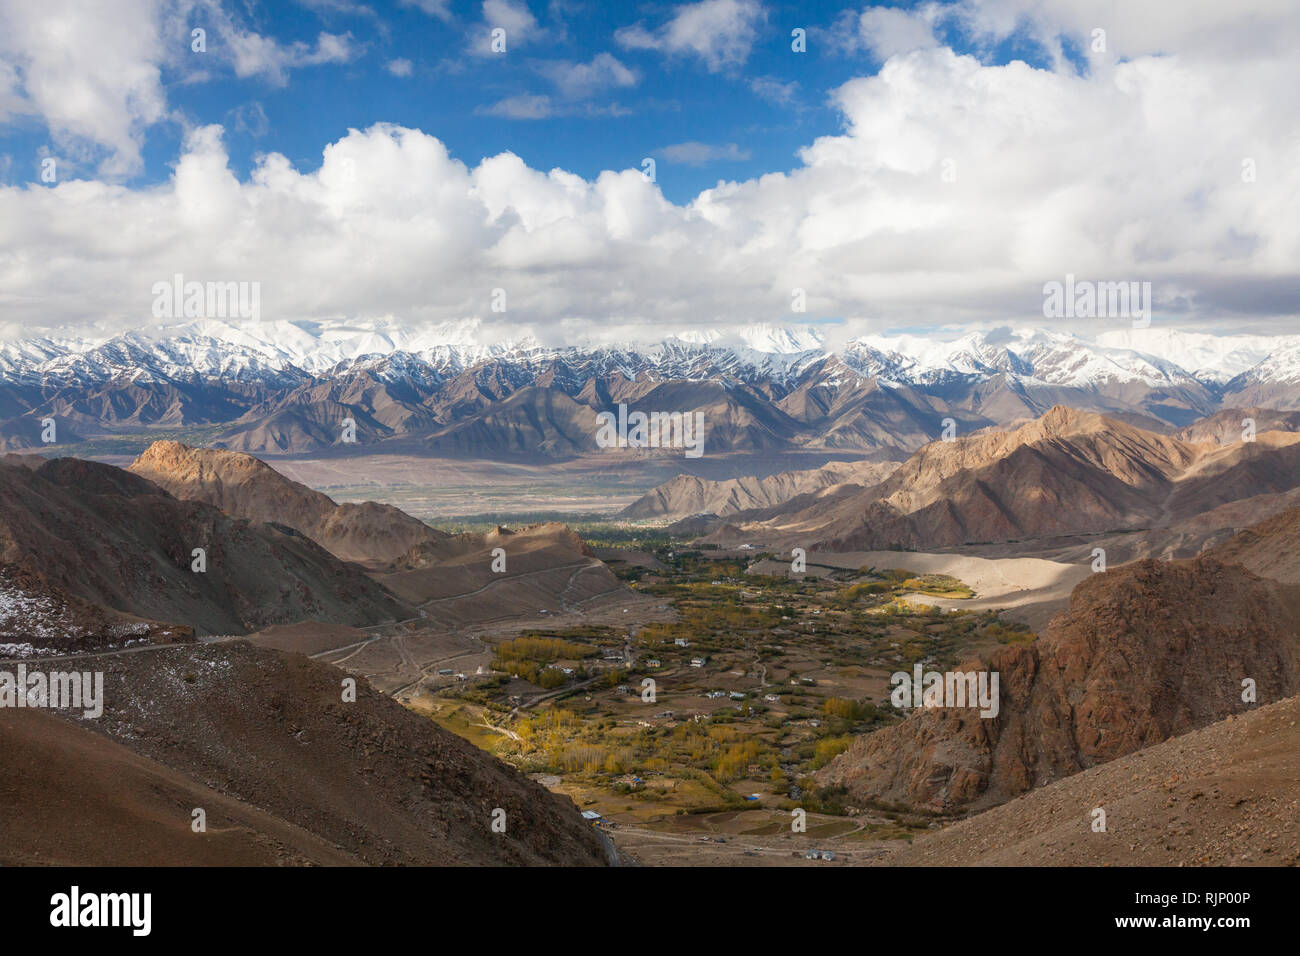 View towards Leh, Indus Valley and Stok Range from from the high altitude road connecting Leh and Khardung La, Ladakh, Jammu and Kashmir, India Stock Photo